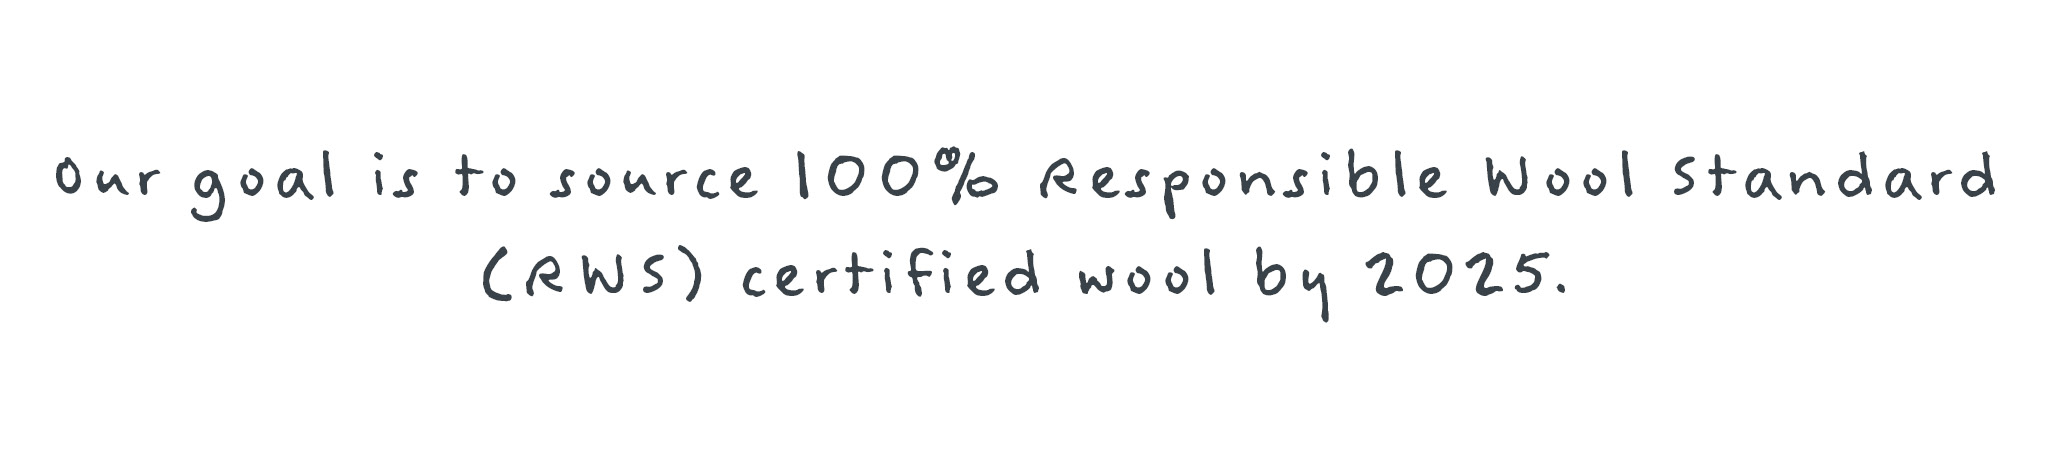 Our Goal is to source 100% Responsible Wool Standard certified wool by 2025